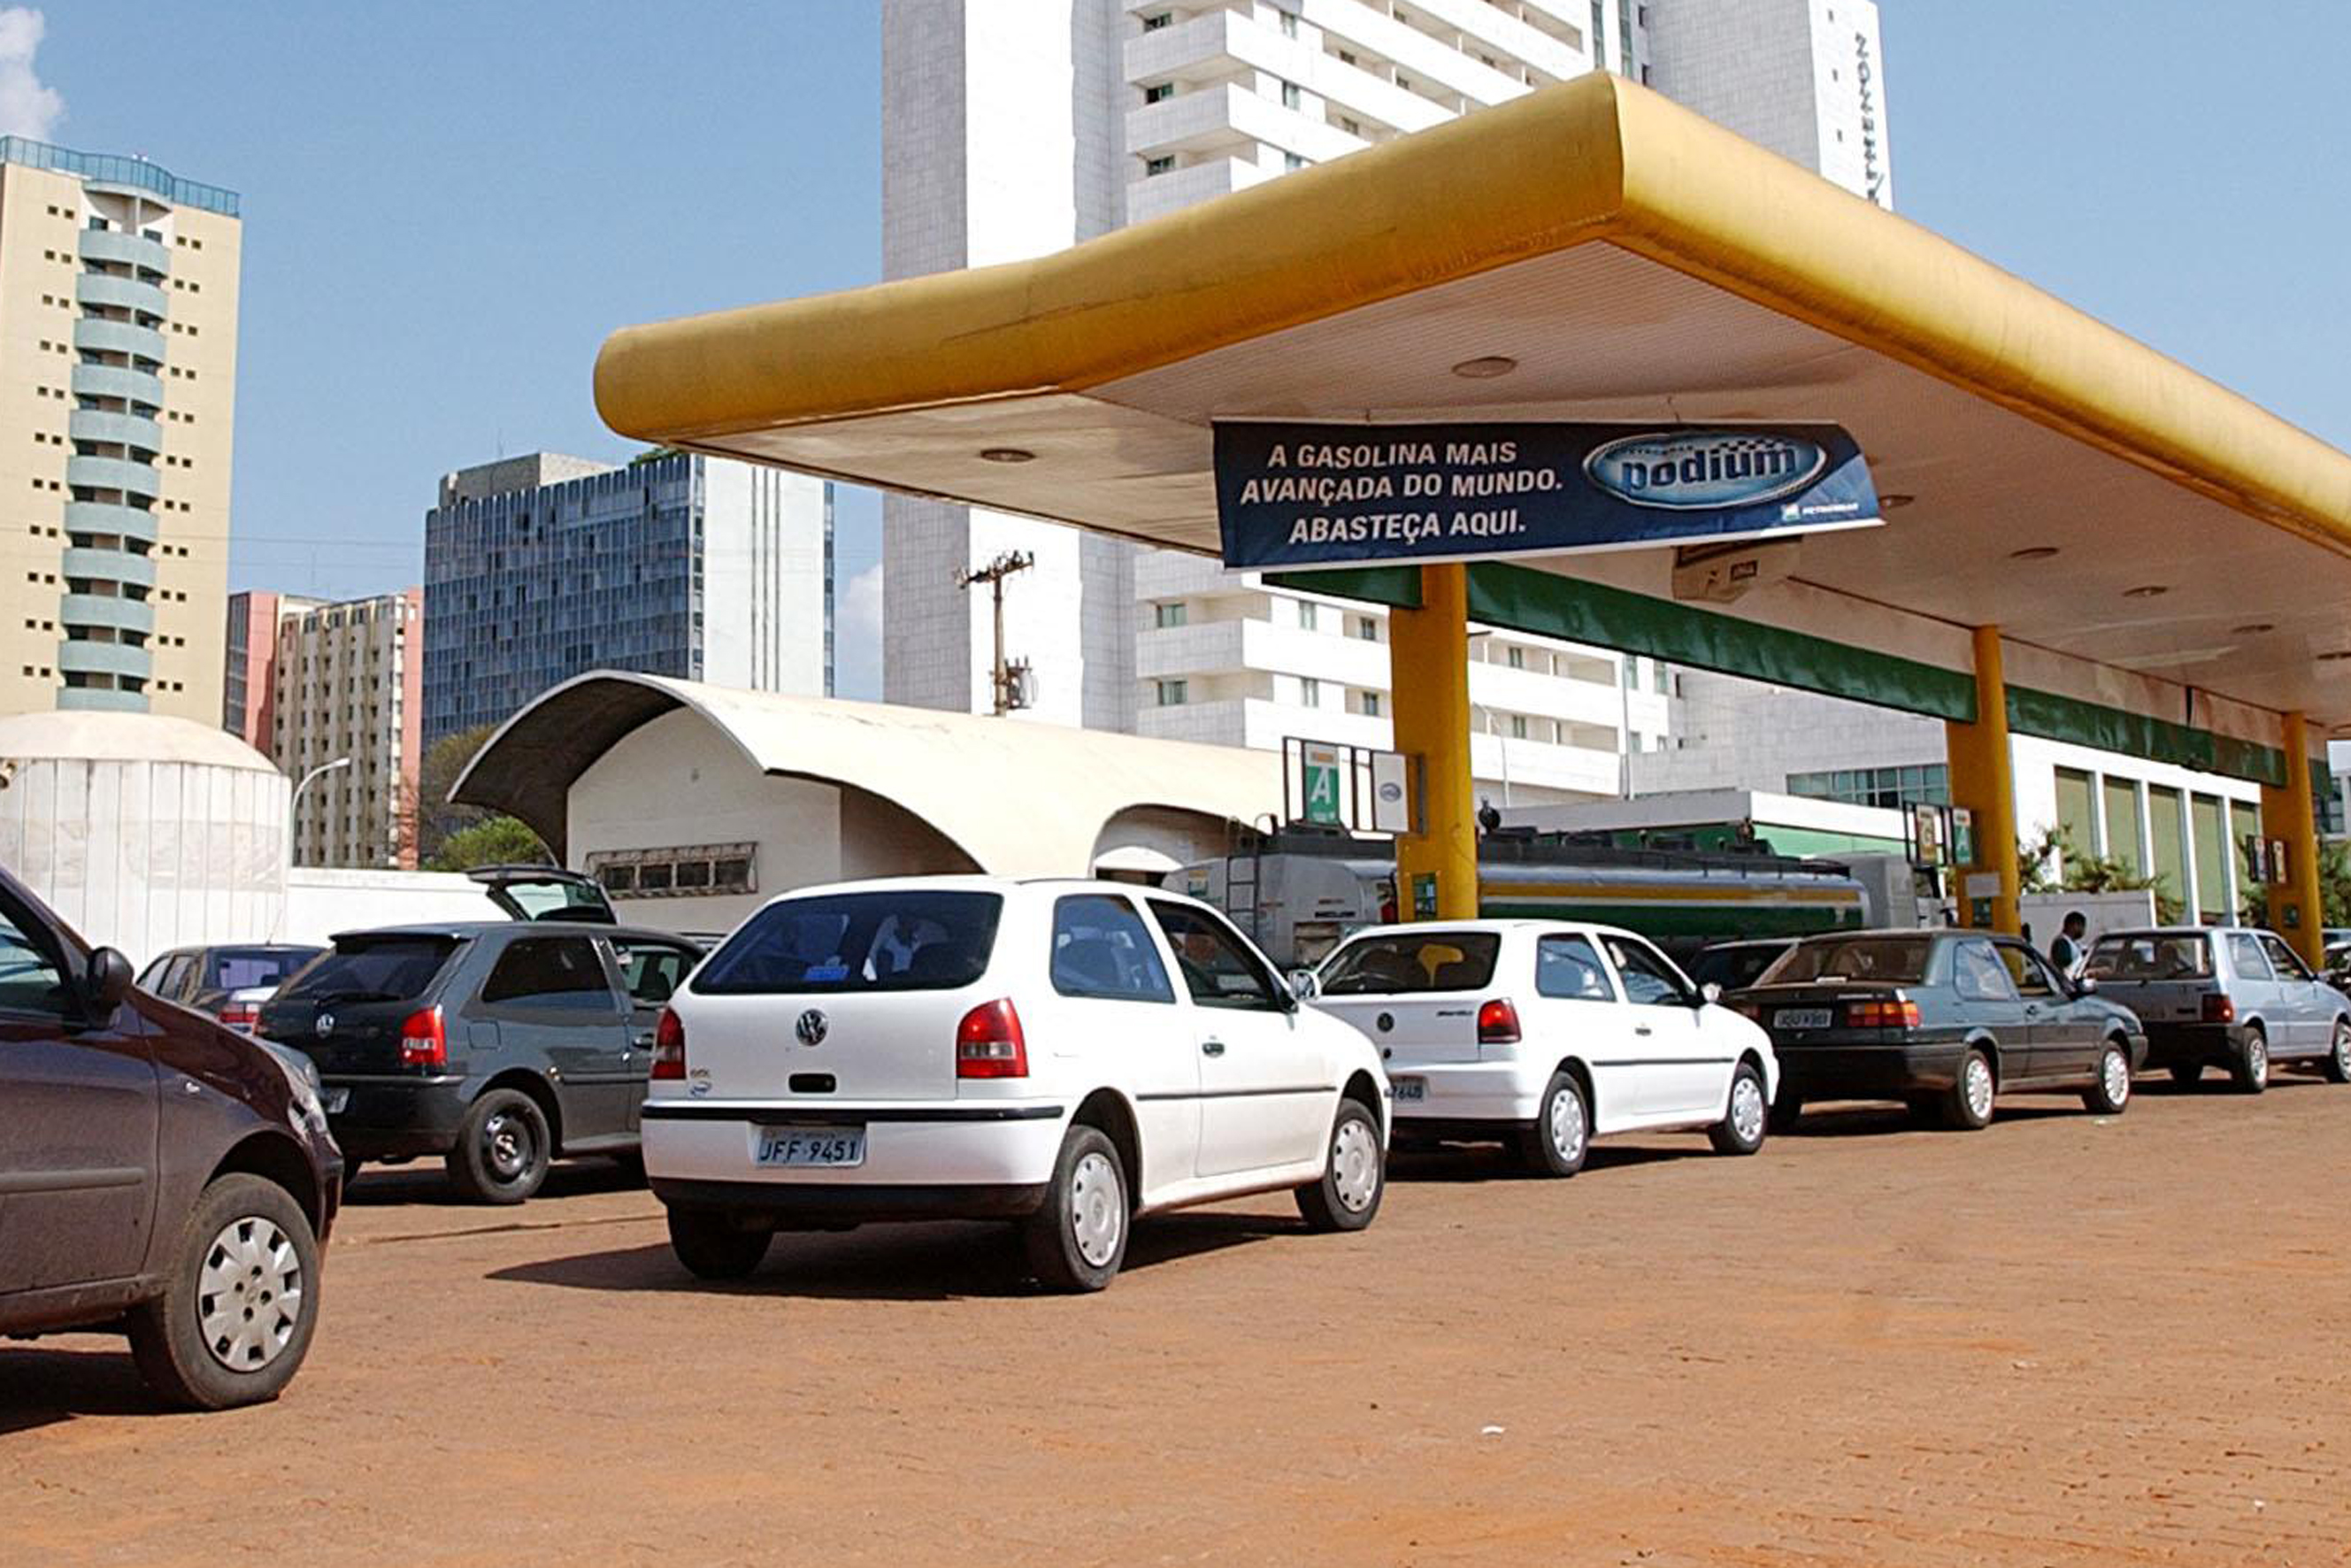 Brazil, Rio de Janeiro,Automobiles line up for less expensive fuel in many parts of the country